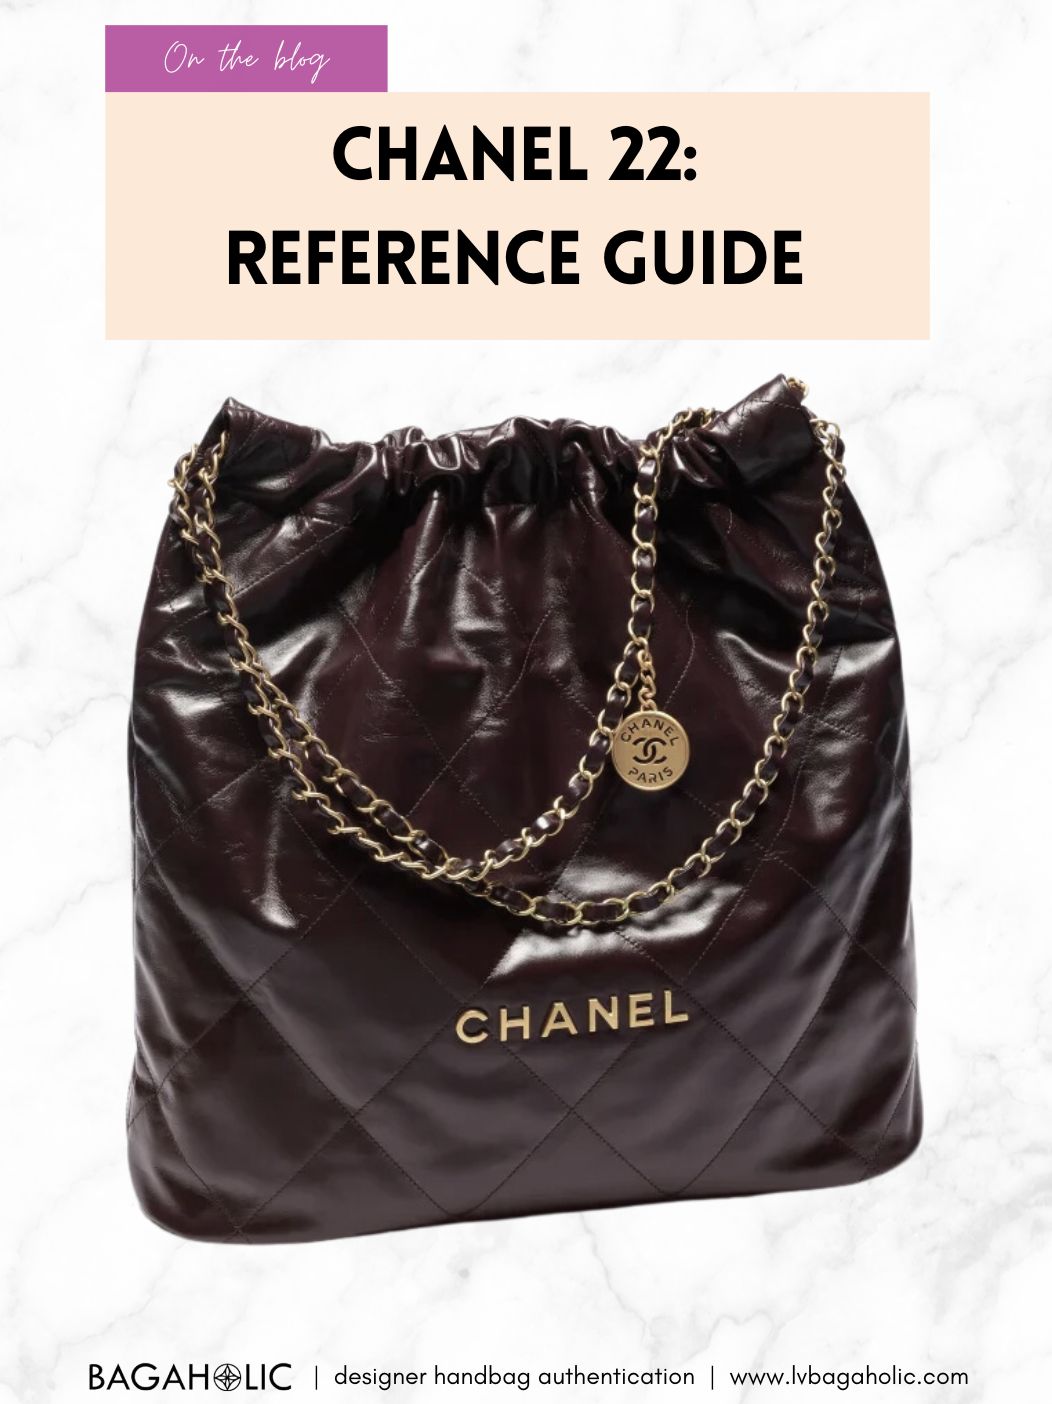 Chanel 22 price list reference guide